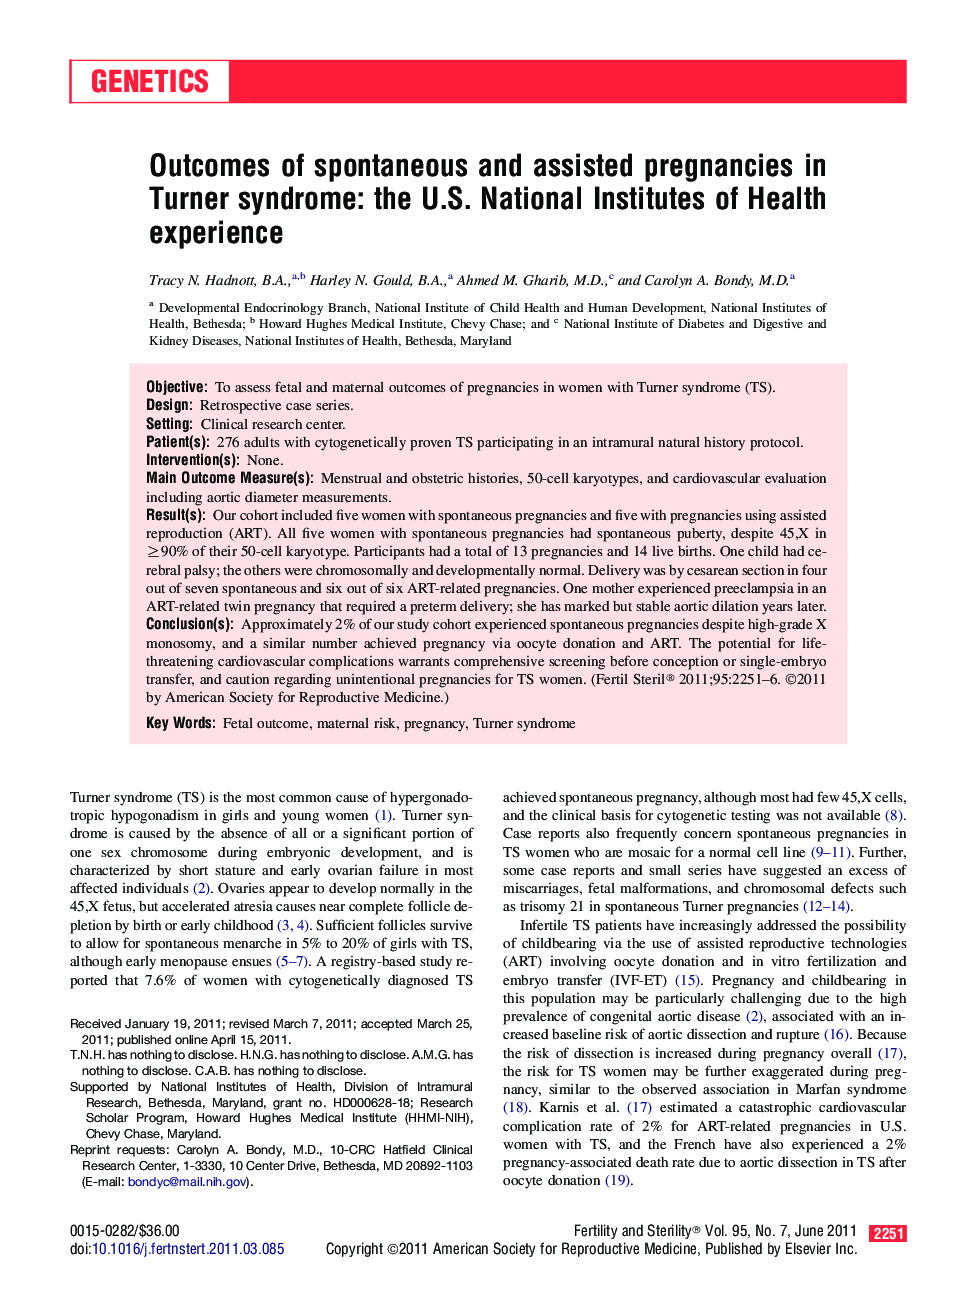 Outcomes of spontaneous and assisted pregnancies in Turner syndrome: the U.S. National Institutes of Health experience 